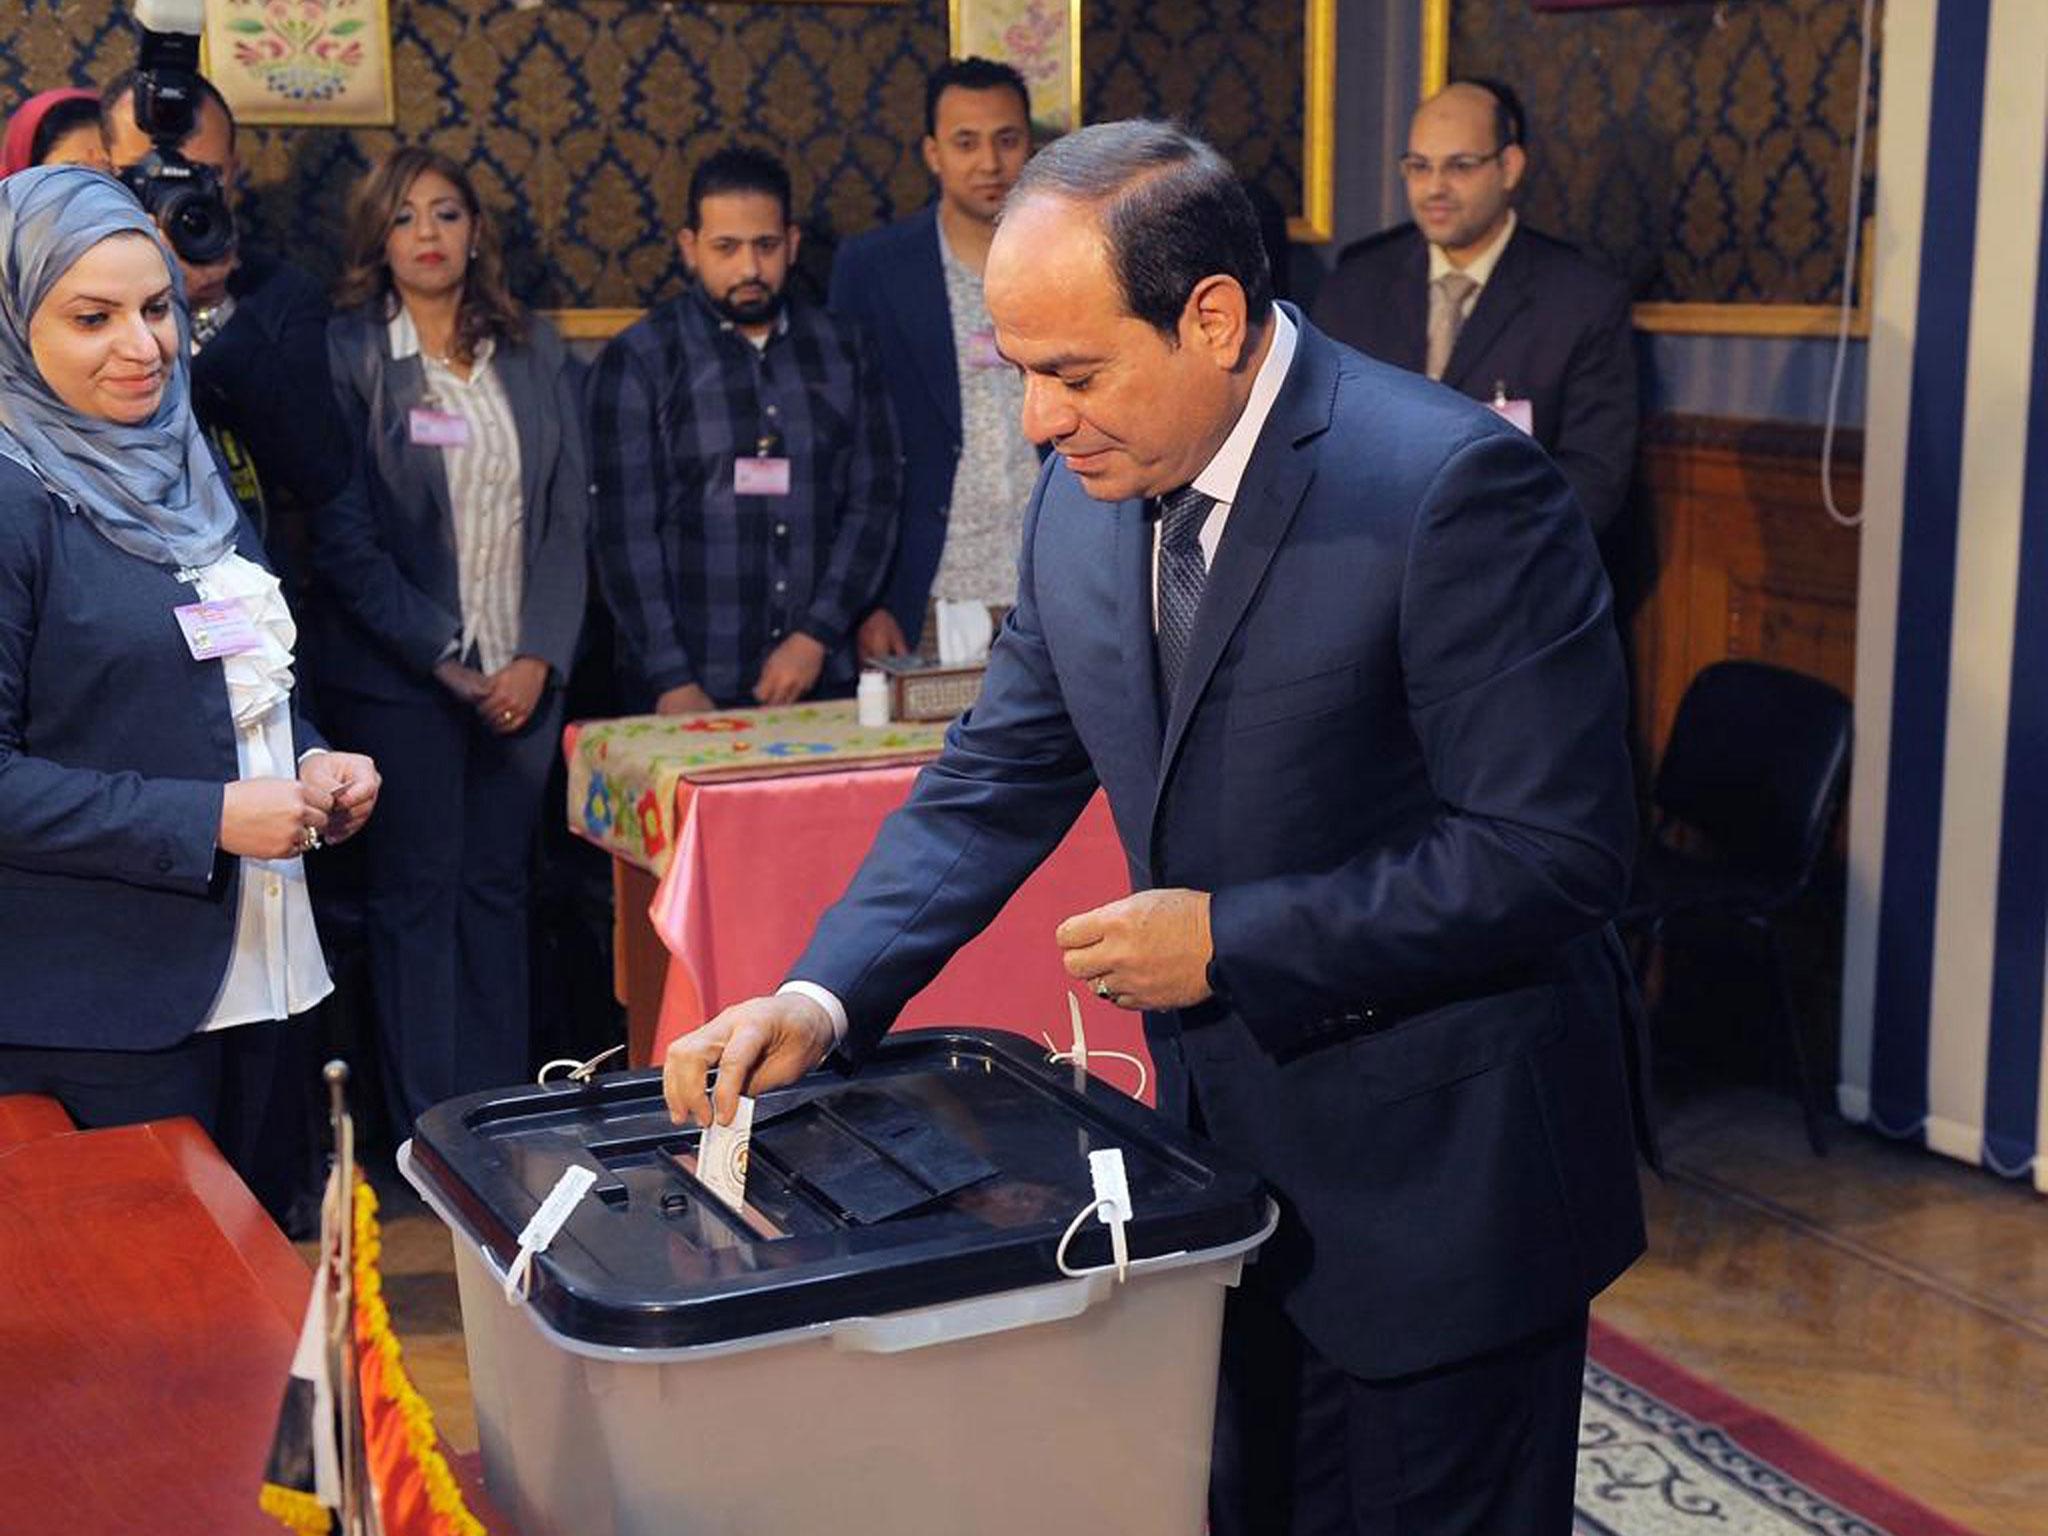 Egyptian President Abdel Fattah al-Sisi casts his ballot. Voting in the election took place over a three-day period, extended for an hour amid very low turnout